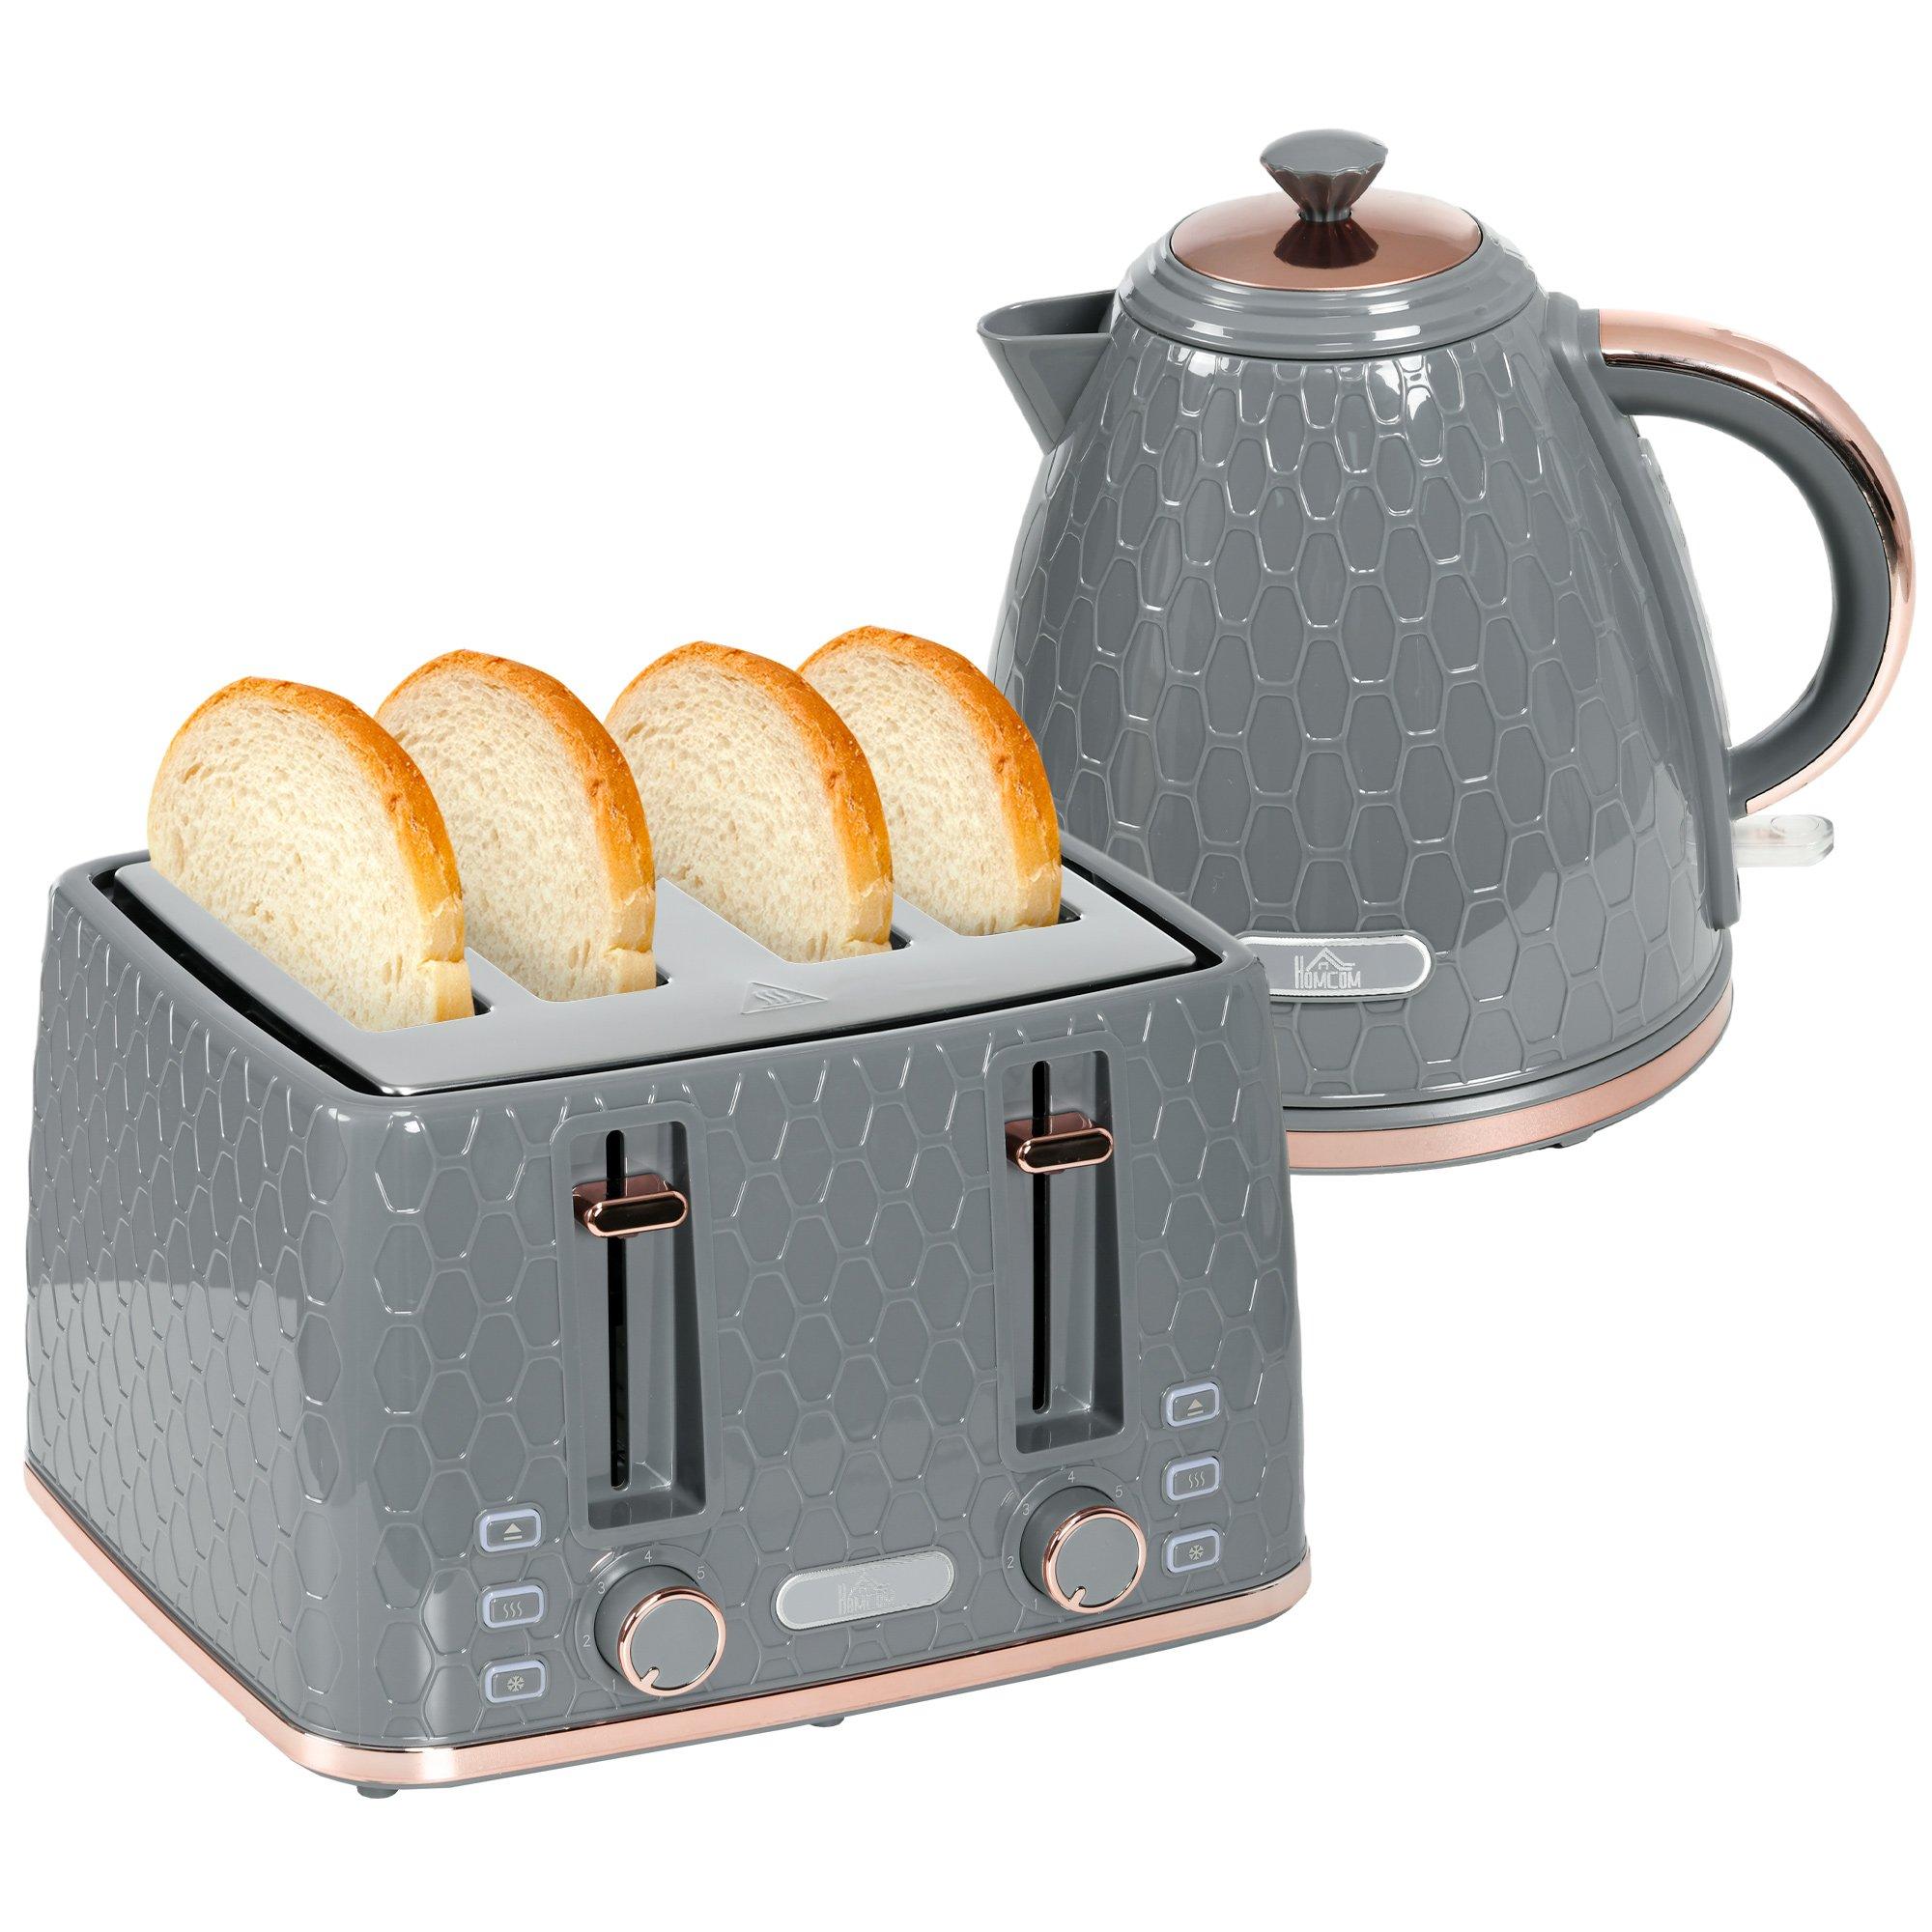 1.7L 3000W Fast Boil Kettle 4 Slice Toaster Set 7 Browning Controls